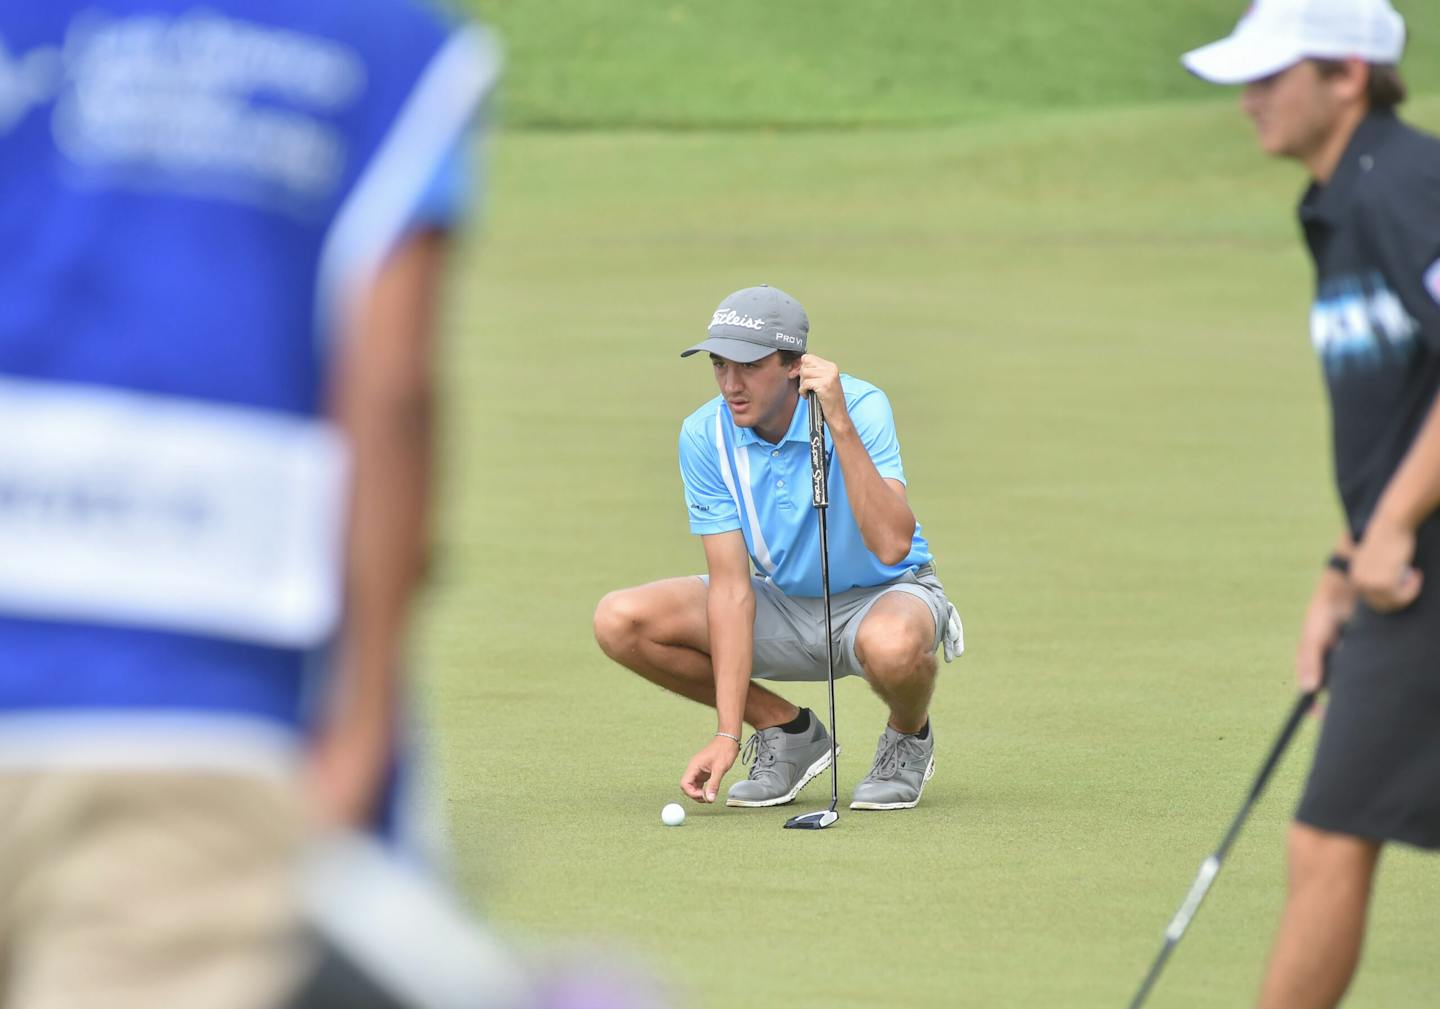 La Romana, DOMINICAN REPUBLIC: Vicente Marzilio of Argentina pictured at the 2022 Latin America Amateur Championship at Casa de Campo Resort during Final Round on January 23rd, 2022.